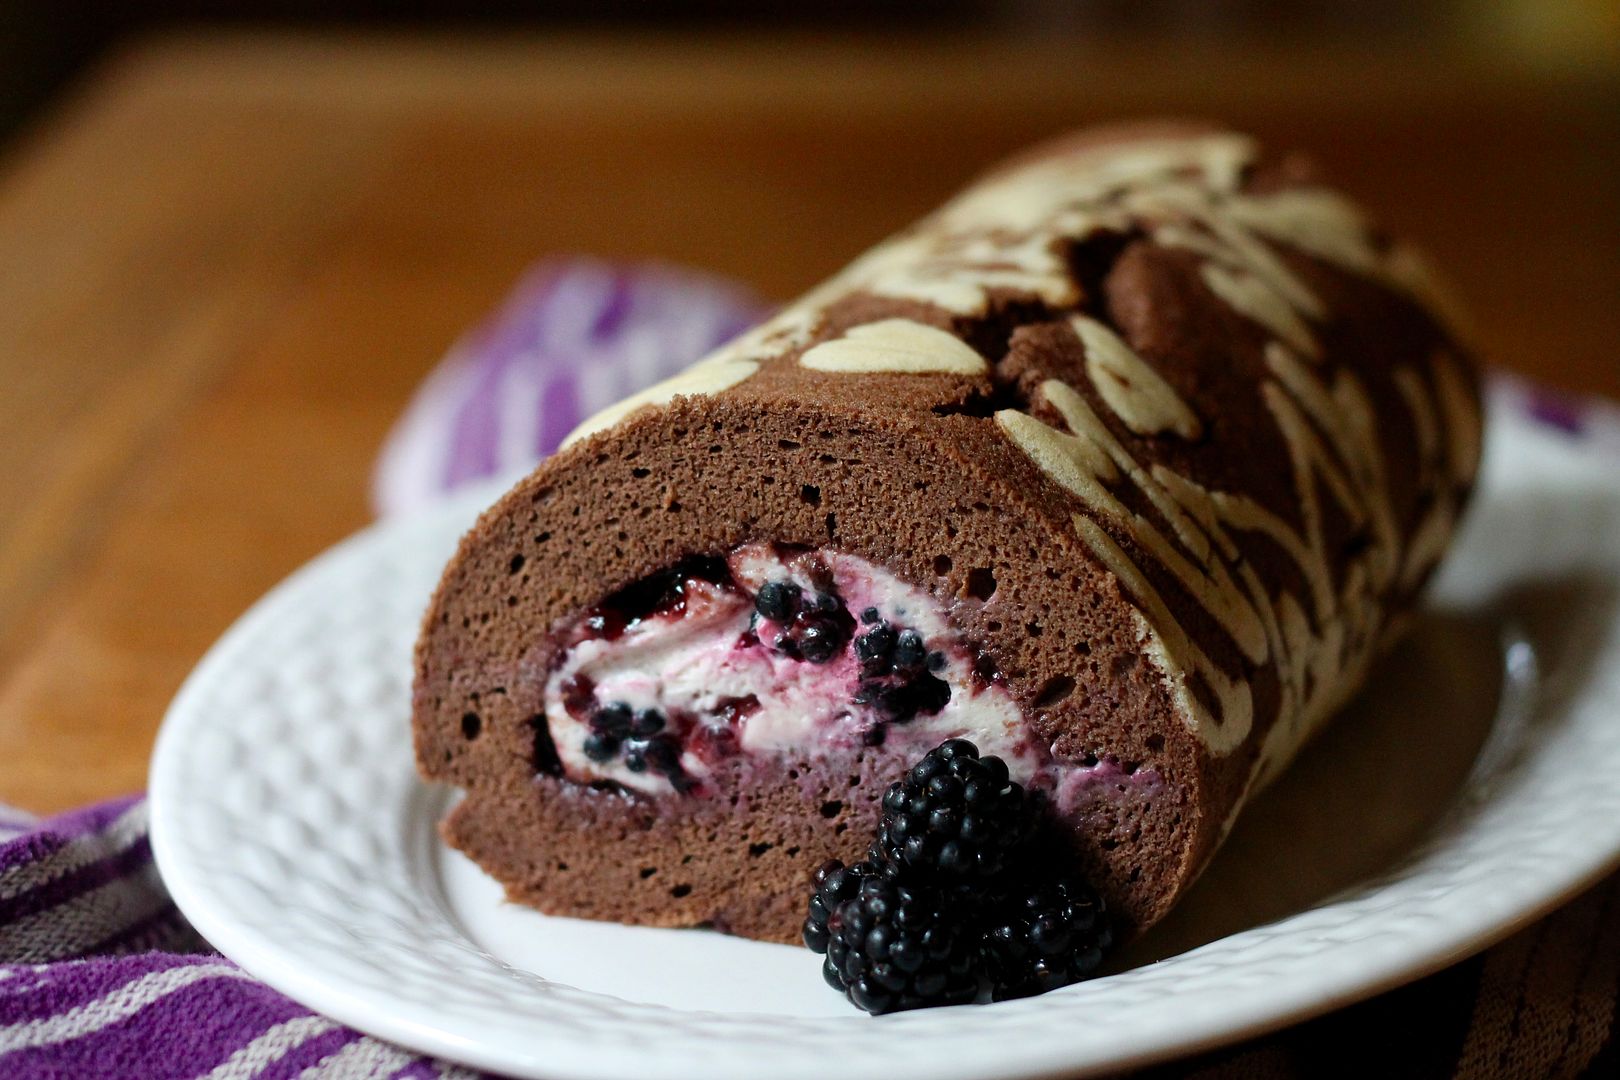 Decorated Swiss Roll | Korena in the Kitchen